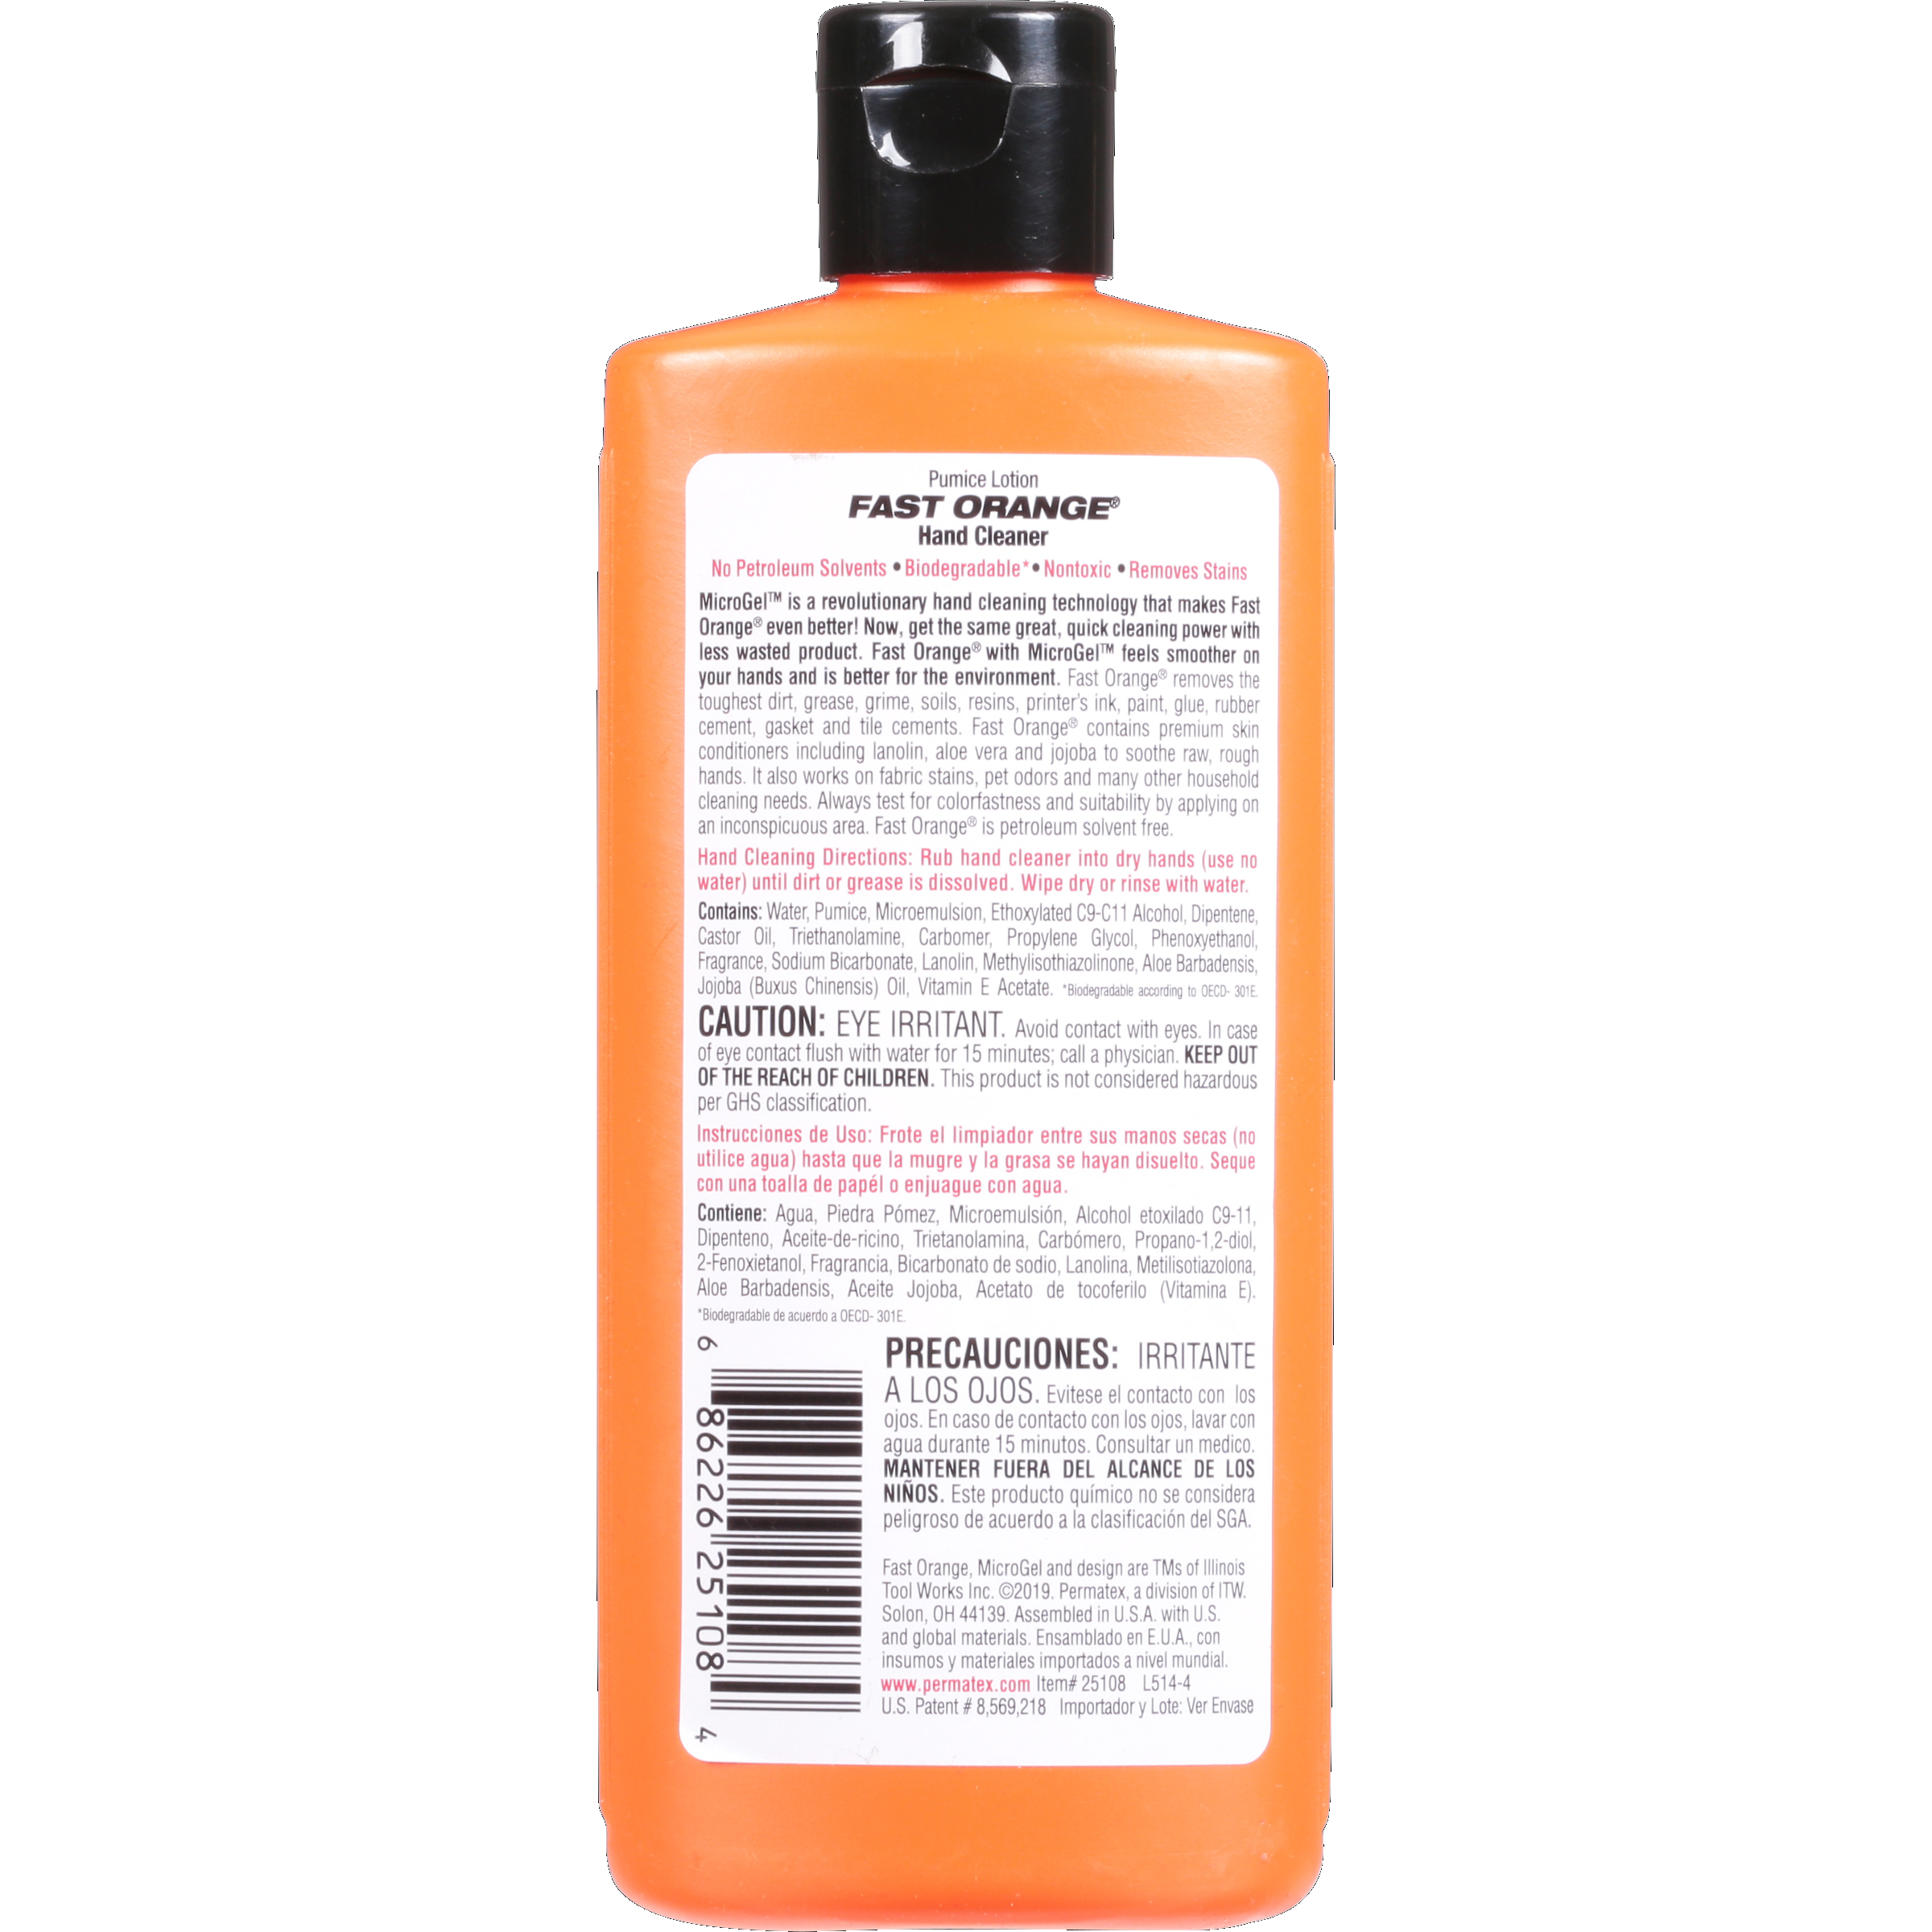 Permatex Fast Orange Fine Pumice Lotion Hand Cleaner - 7.5 Fluid Ounce (2 Pack)